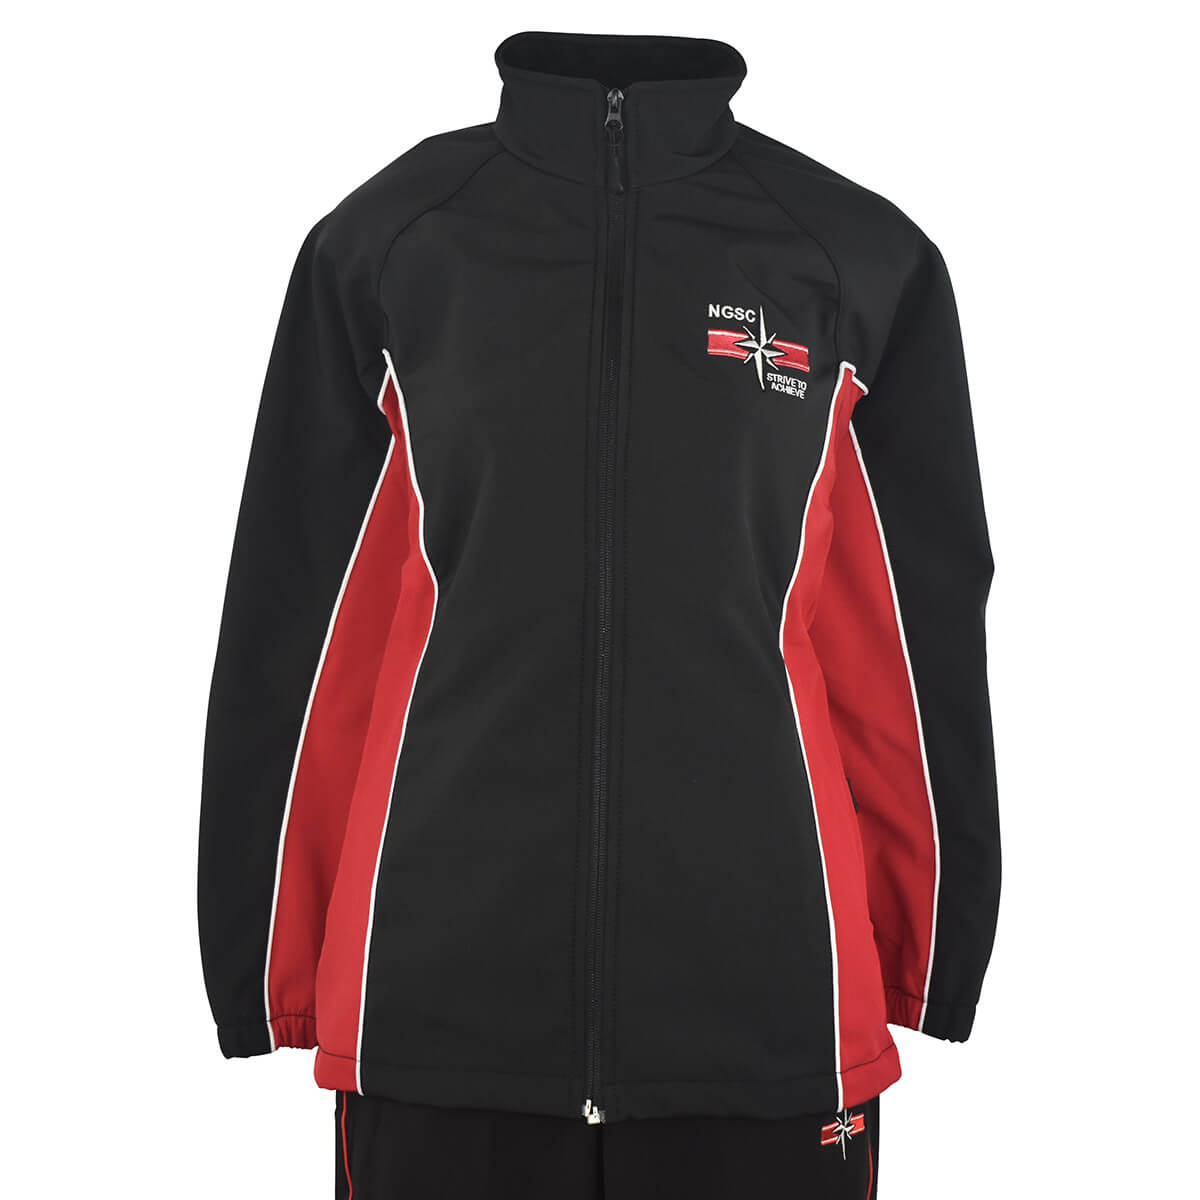 North Geelong S/S Jacket | North Geelong Secondary College | Noone